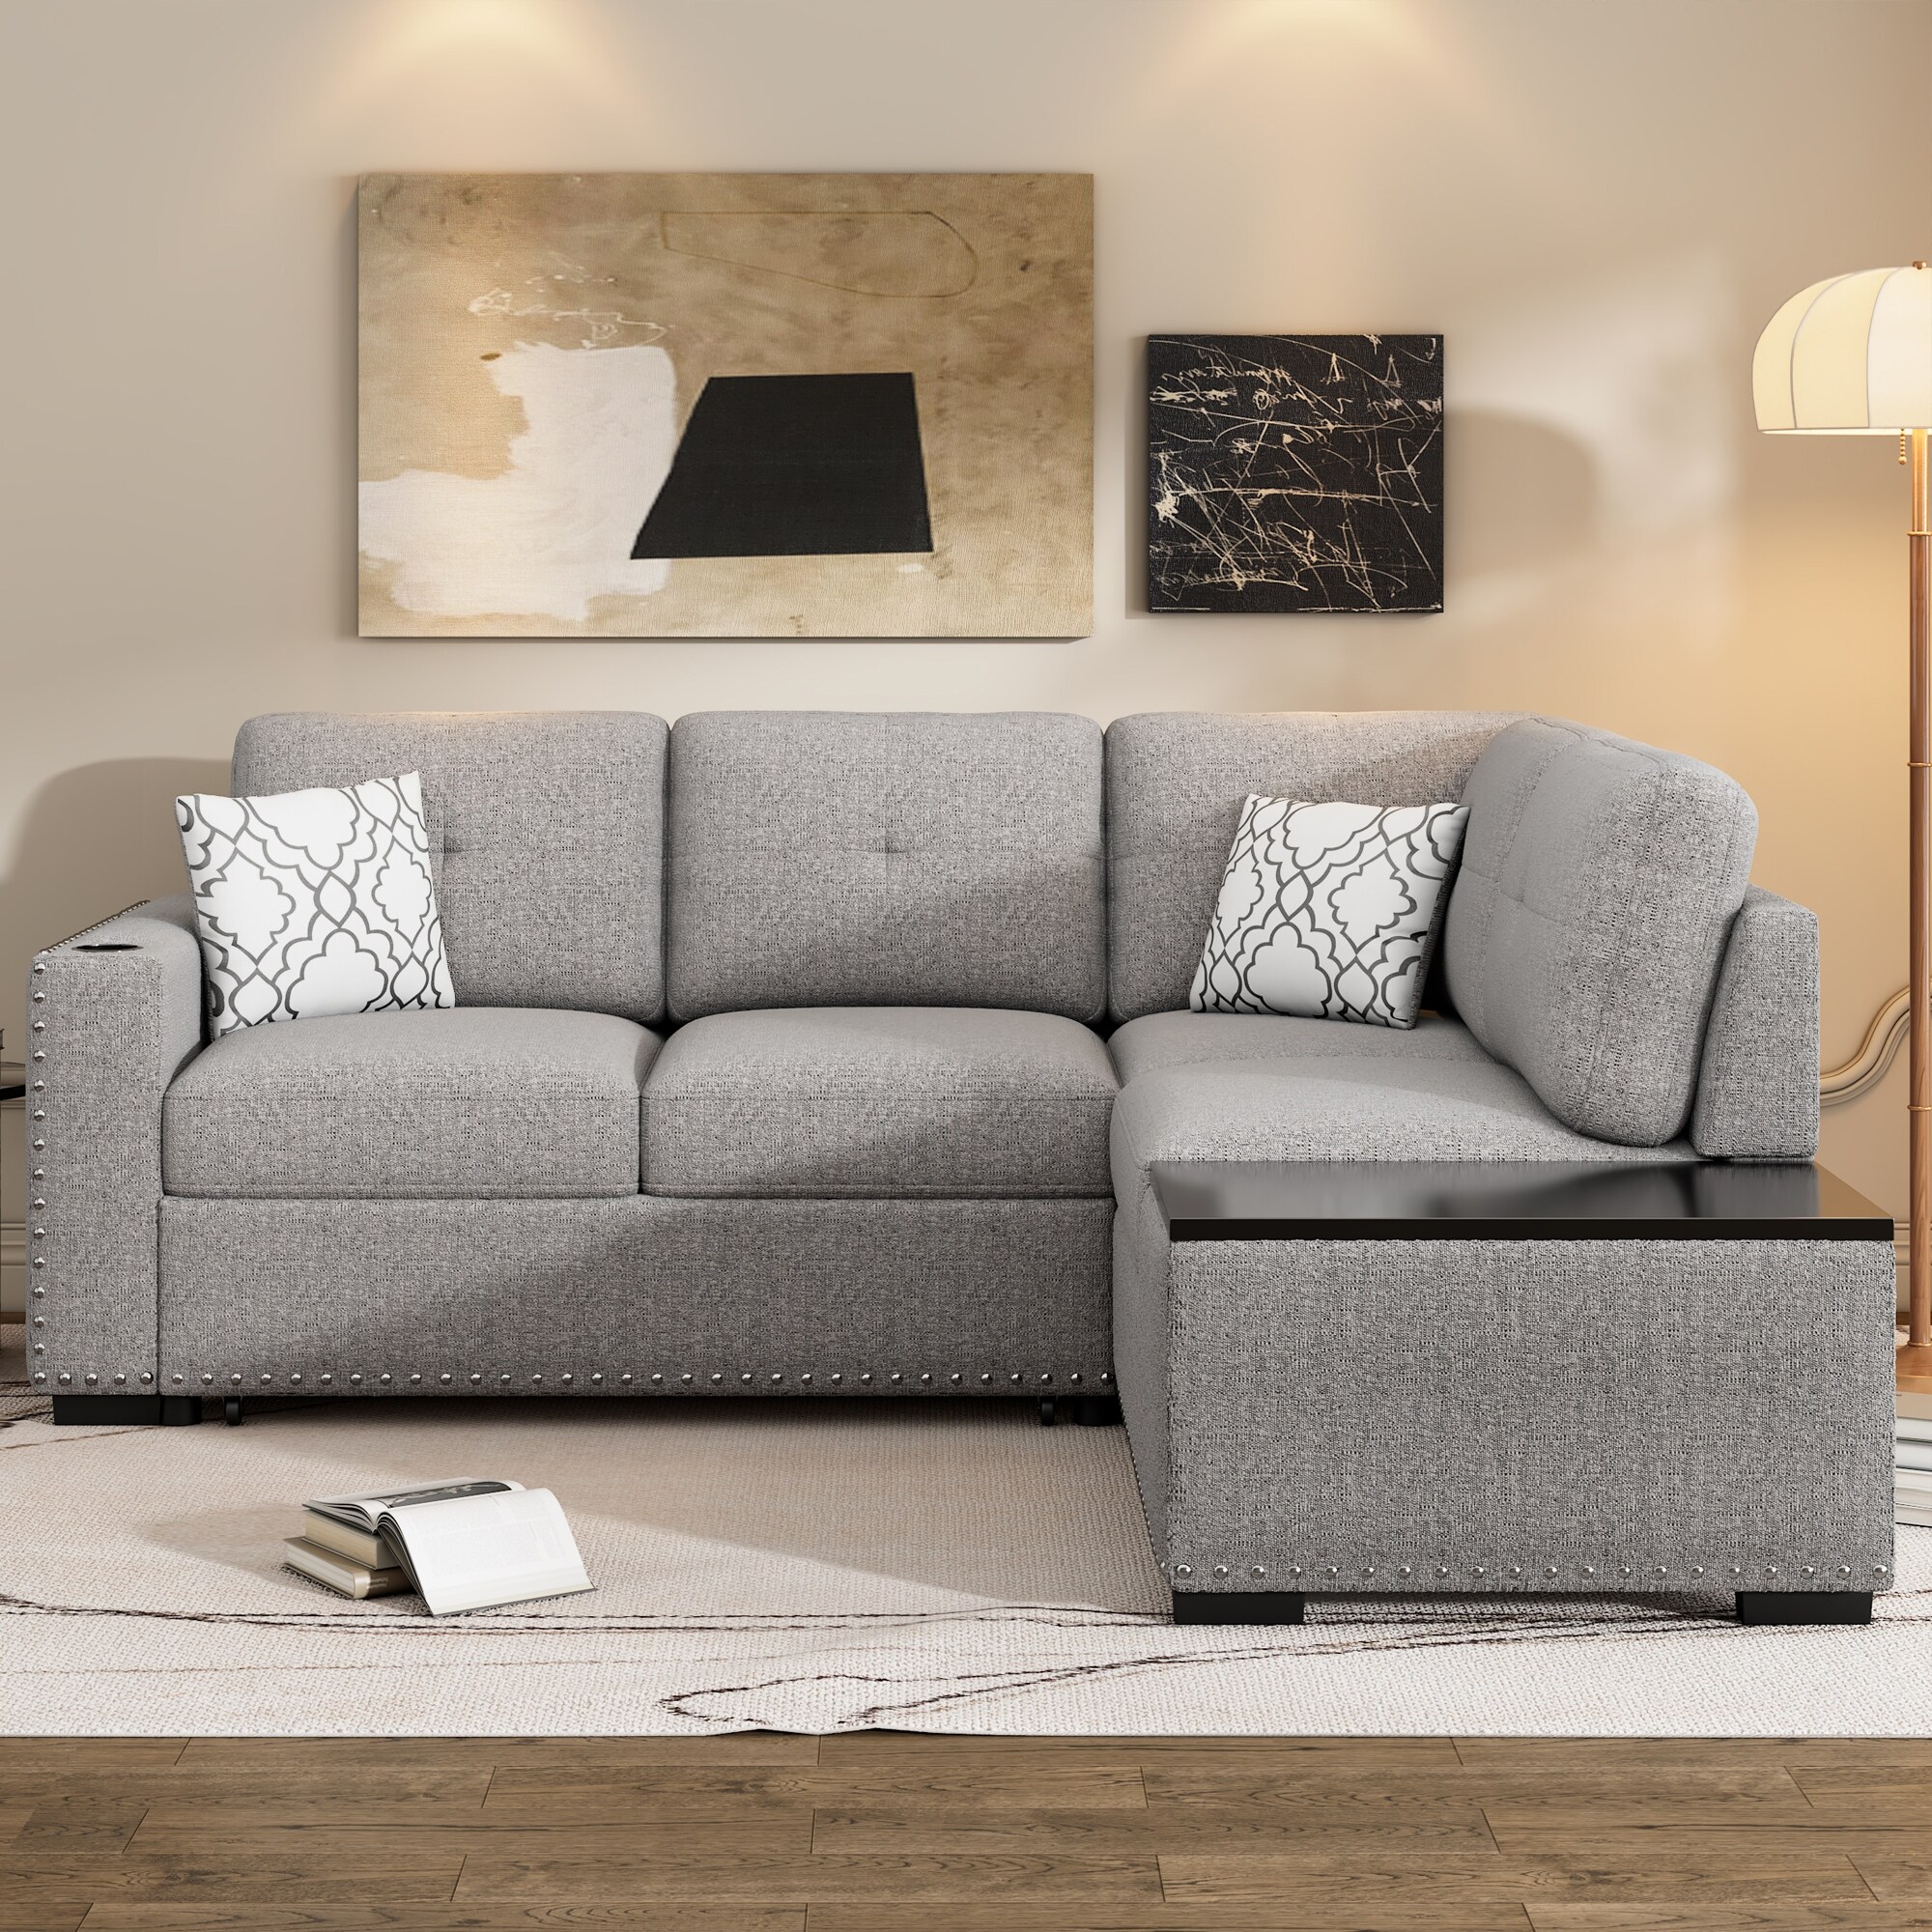 https://ak1.ostkcdn.com/images/products/is/images/direct/584d0f2465ebd0526fbc8f3c6b5a89e636f8ee0e/83.8%22-L-Shaped-Reversible-Sectional-Sofa-w-USB-Ports-%26-Power-Sockets-Modern-Pull-Out-Sofa-Bed-w-Storage-Chaise-%26-Cup-Holder.jpg